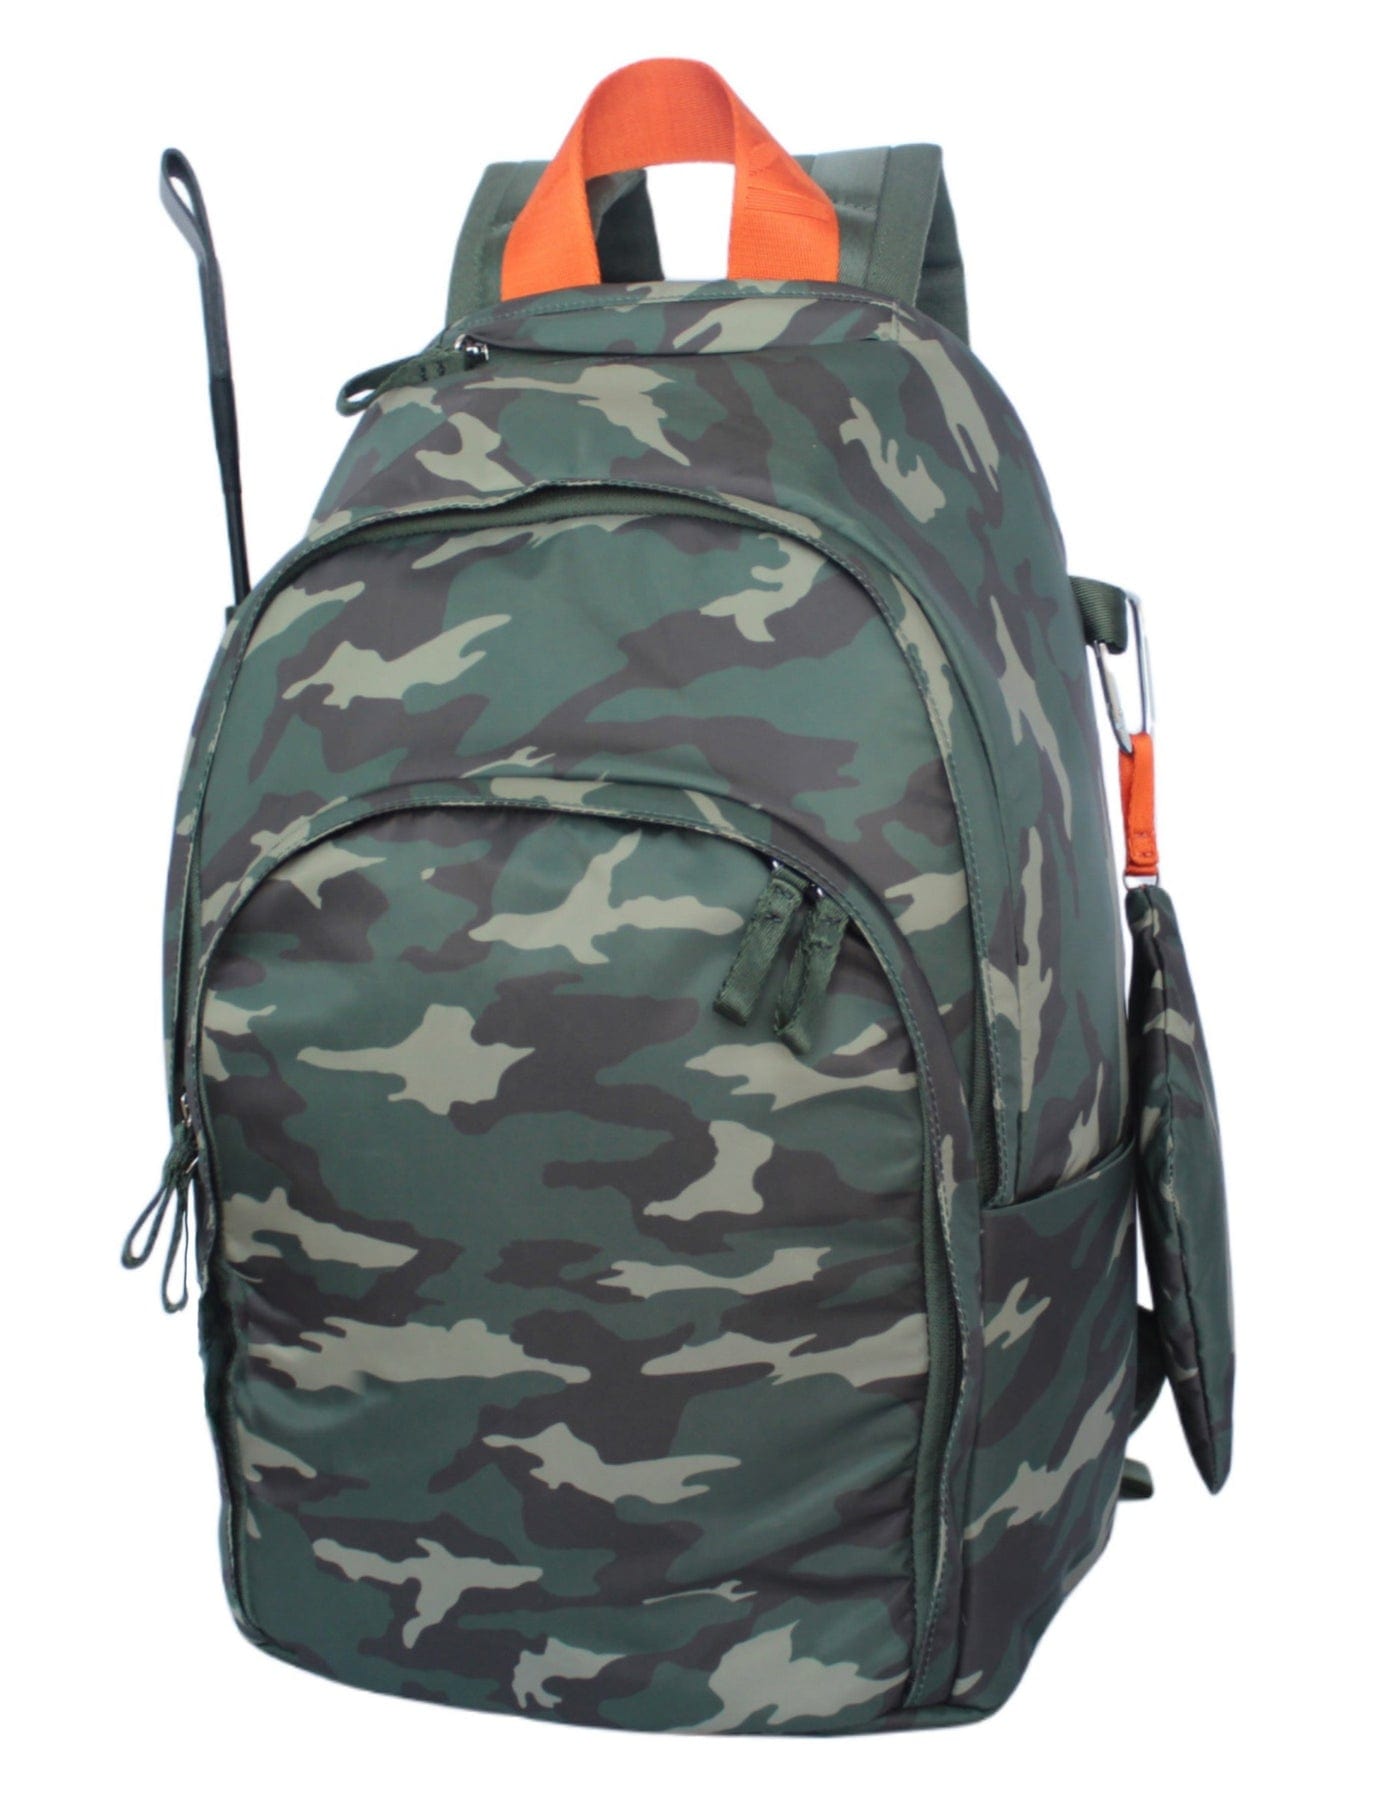 Veltri Backpacks Helmet Backpack by Veltri - Green Camo equestrian team apparel online tack store mobile tack store custom farm apparel custom show stable clothing equestrian lifestyle horse show clothing riding clothes horses equestrian tack store